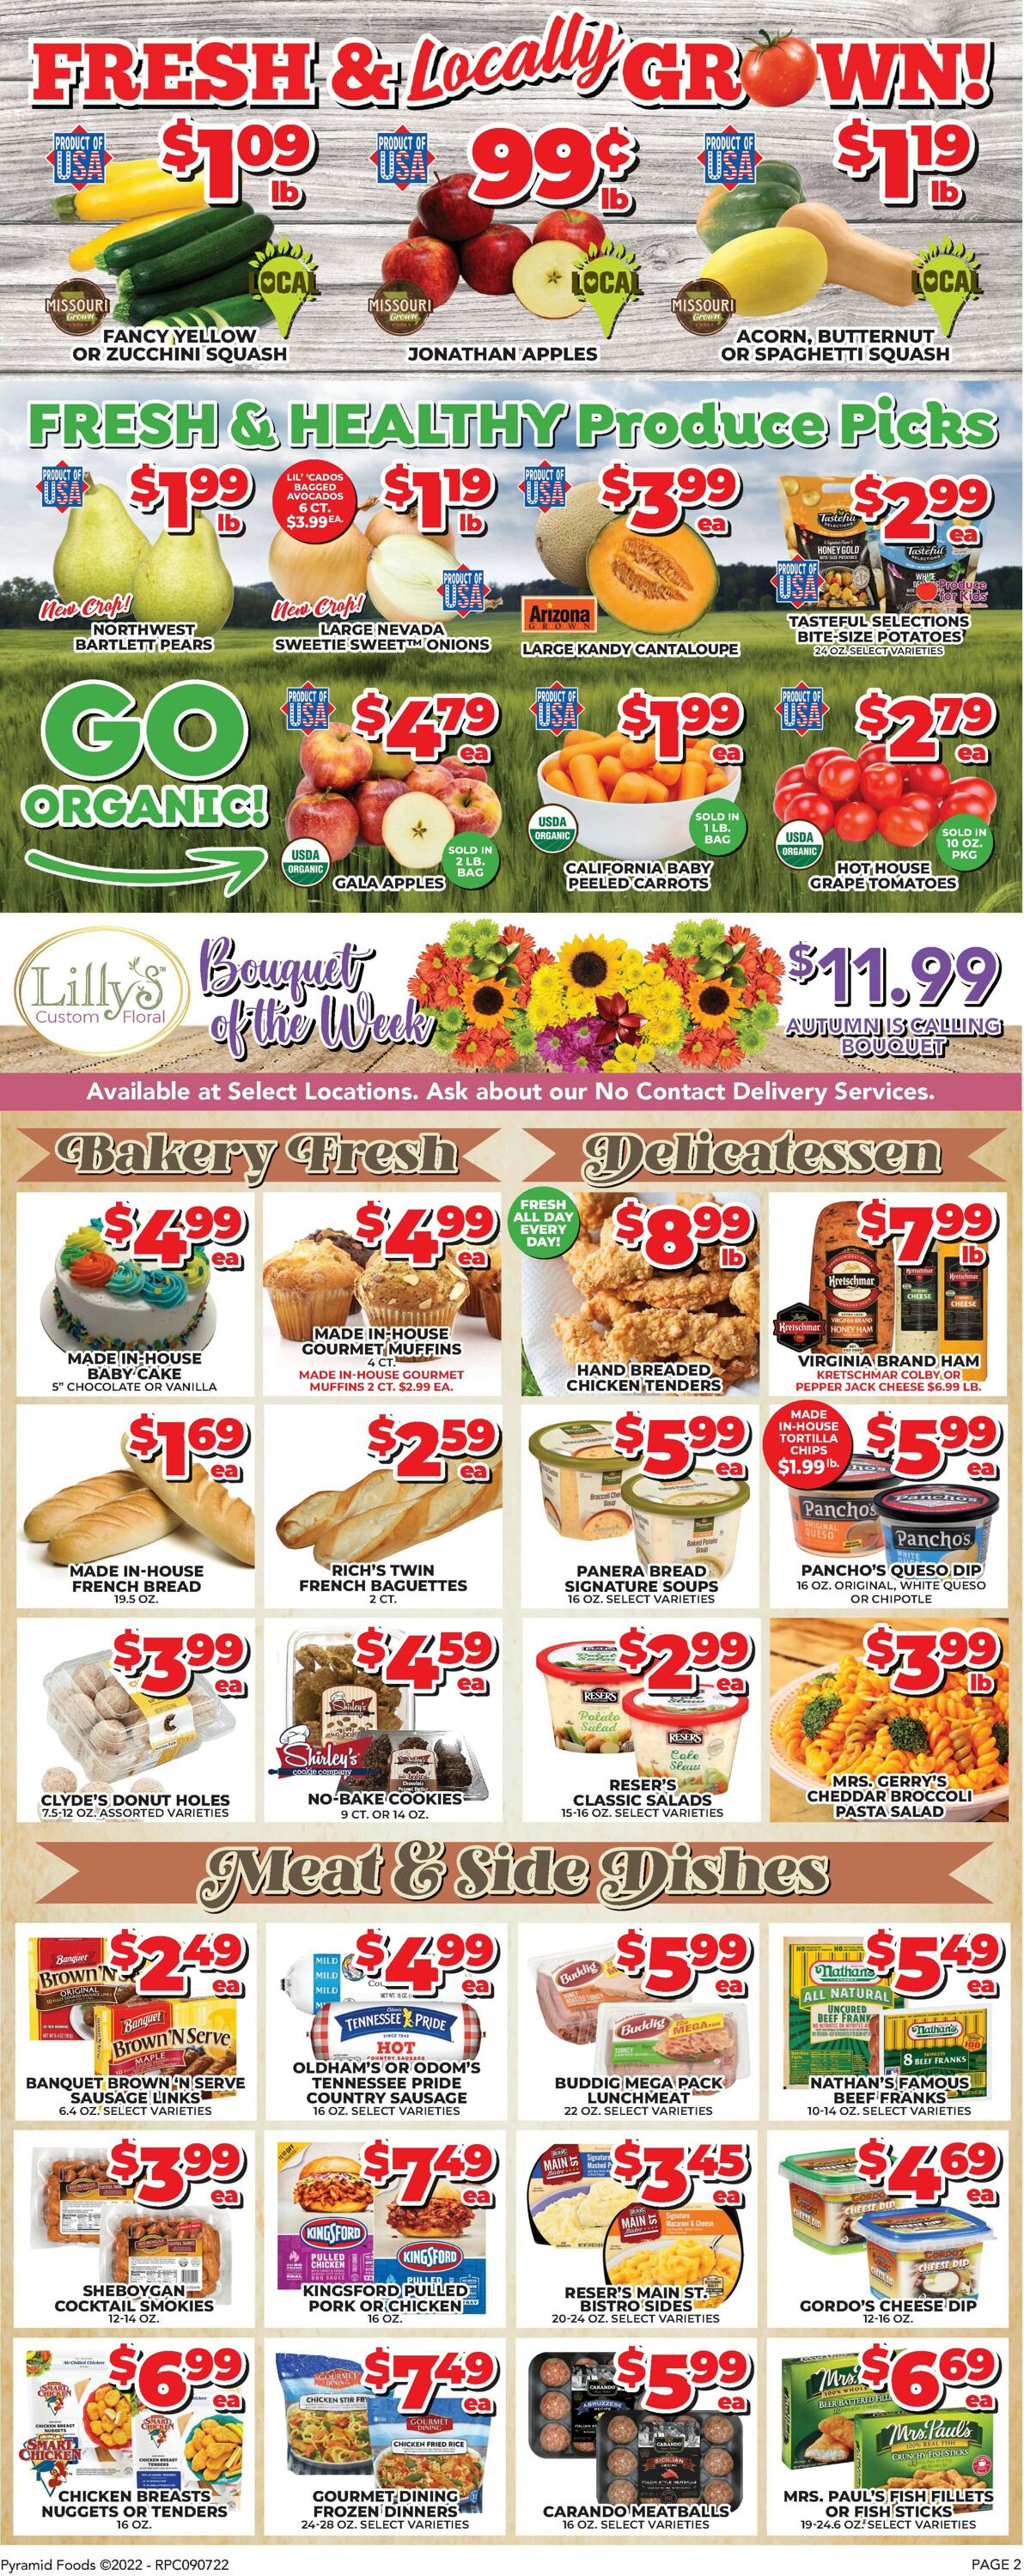 Price Cutter Weekly Ad Circular - valid 09/07-09/13/2022 (Page 2)